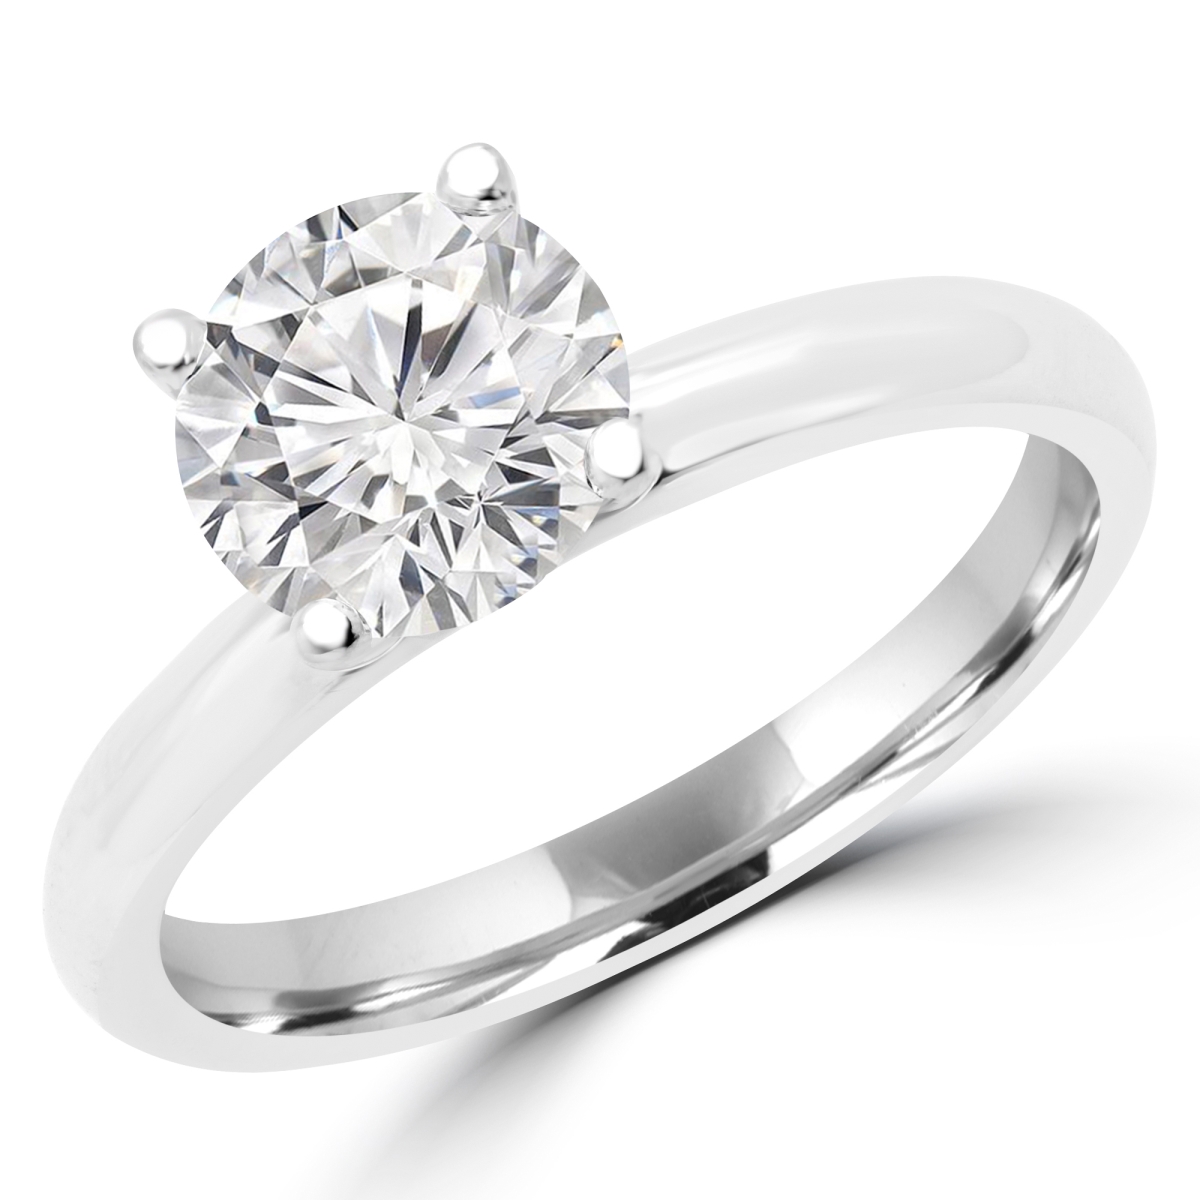 Picture of Majesty Diamonds MD170234-8 0.25 CT Round Diamond Promise Solitaire Engagement Ring in 14K White Gold - Size 8